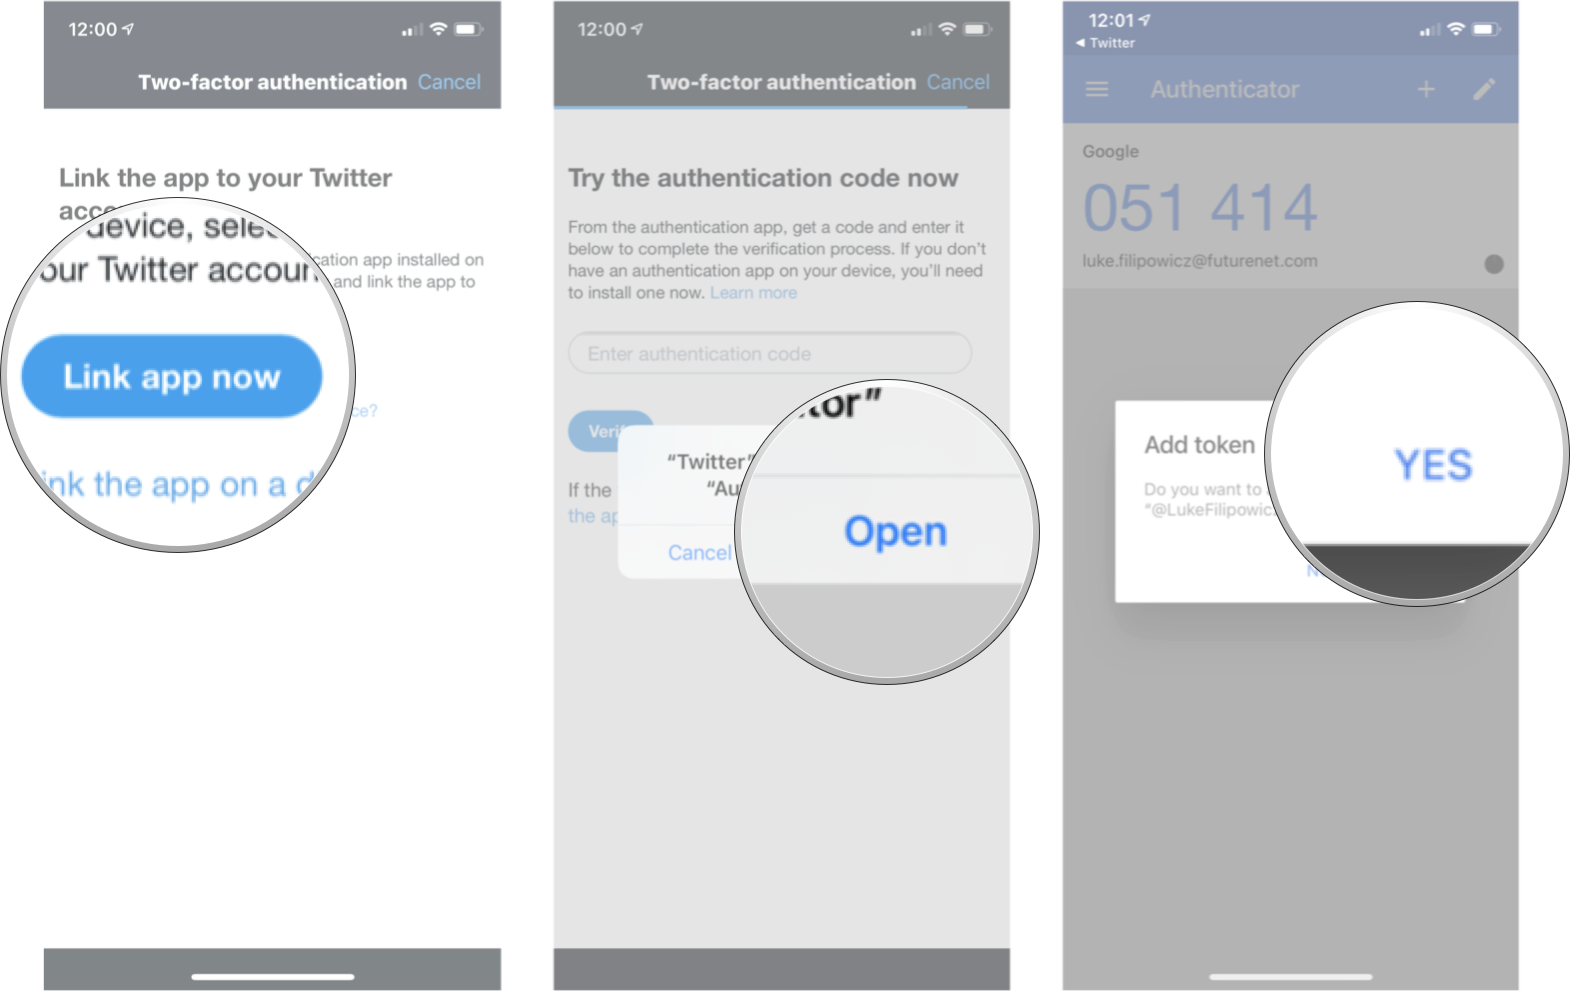 Linking up authentication app in Twitter in iOS 15: Tap link app now, tap open, and then tap yes. 